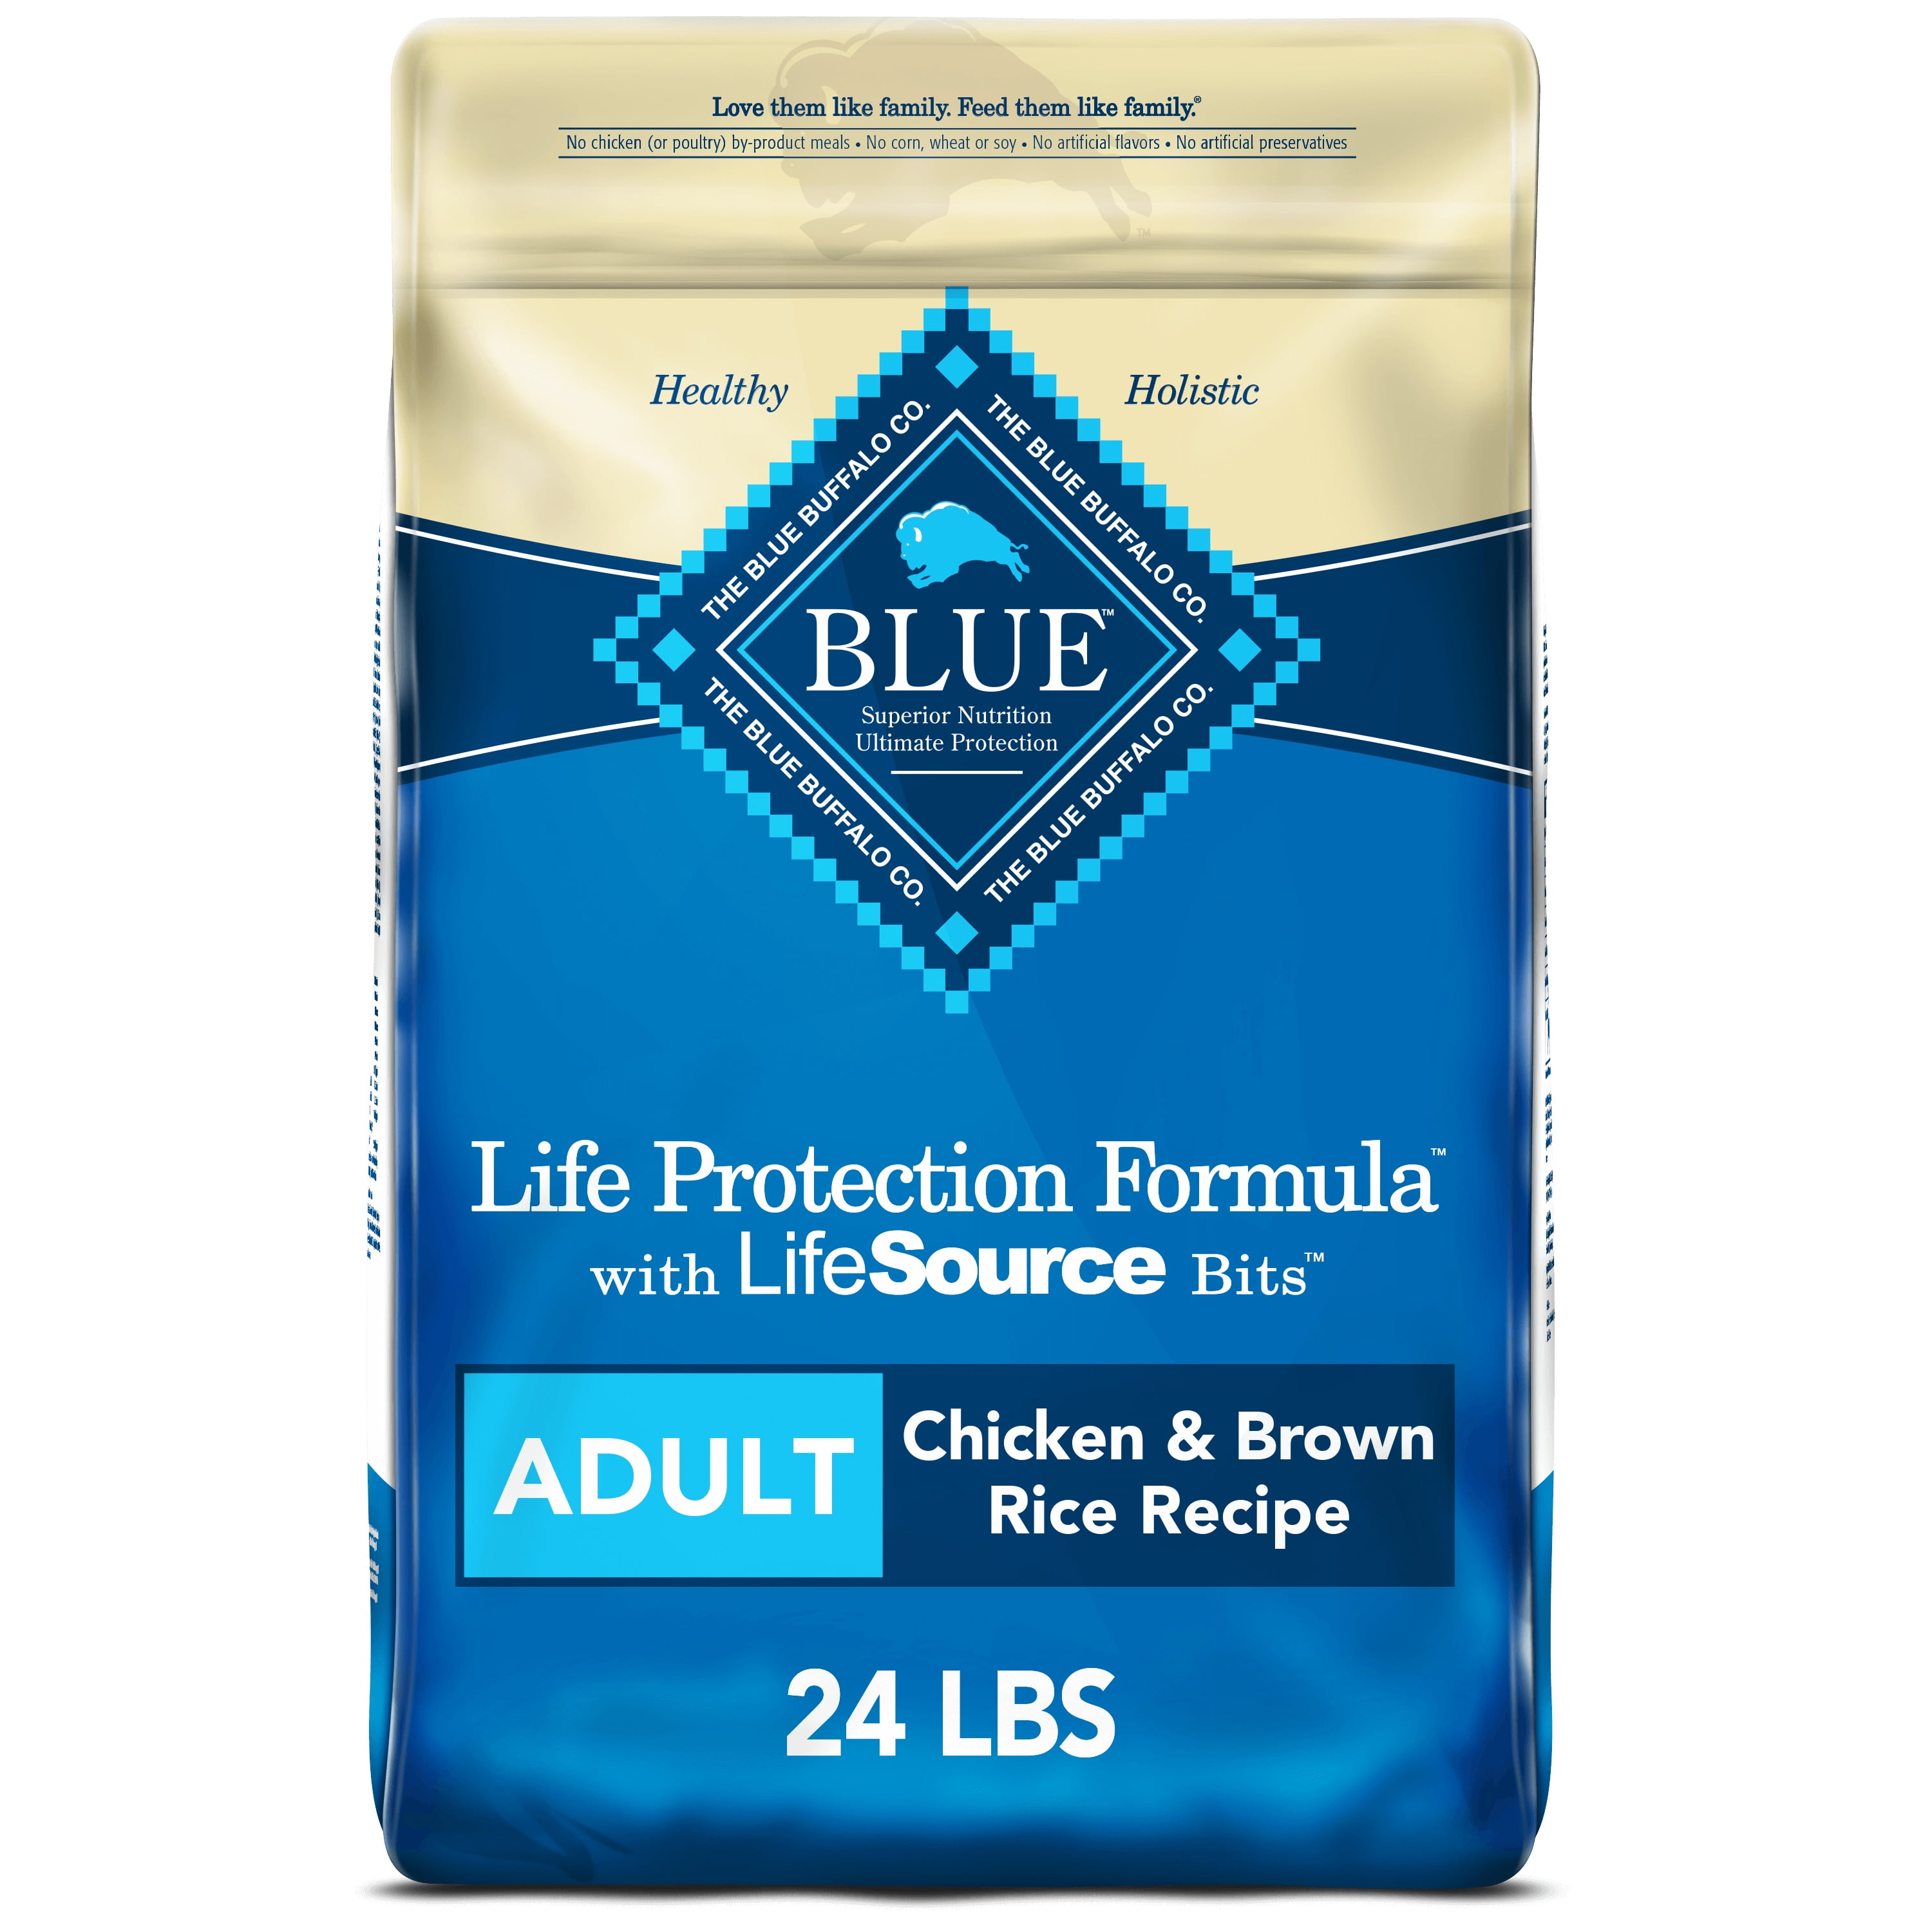 Blue Buffalo Life Protection Formula Chicken and Brown Rice Dry Dog Food for Adult Dogs, Whole Grain, 24 lb. Bag